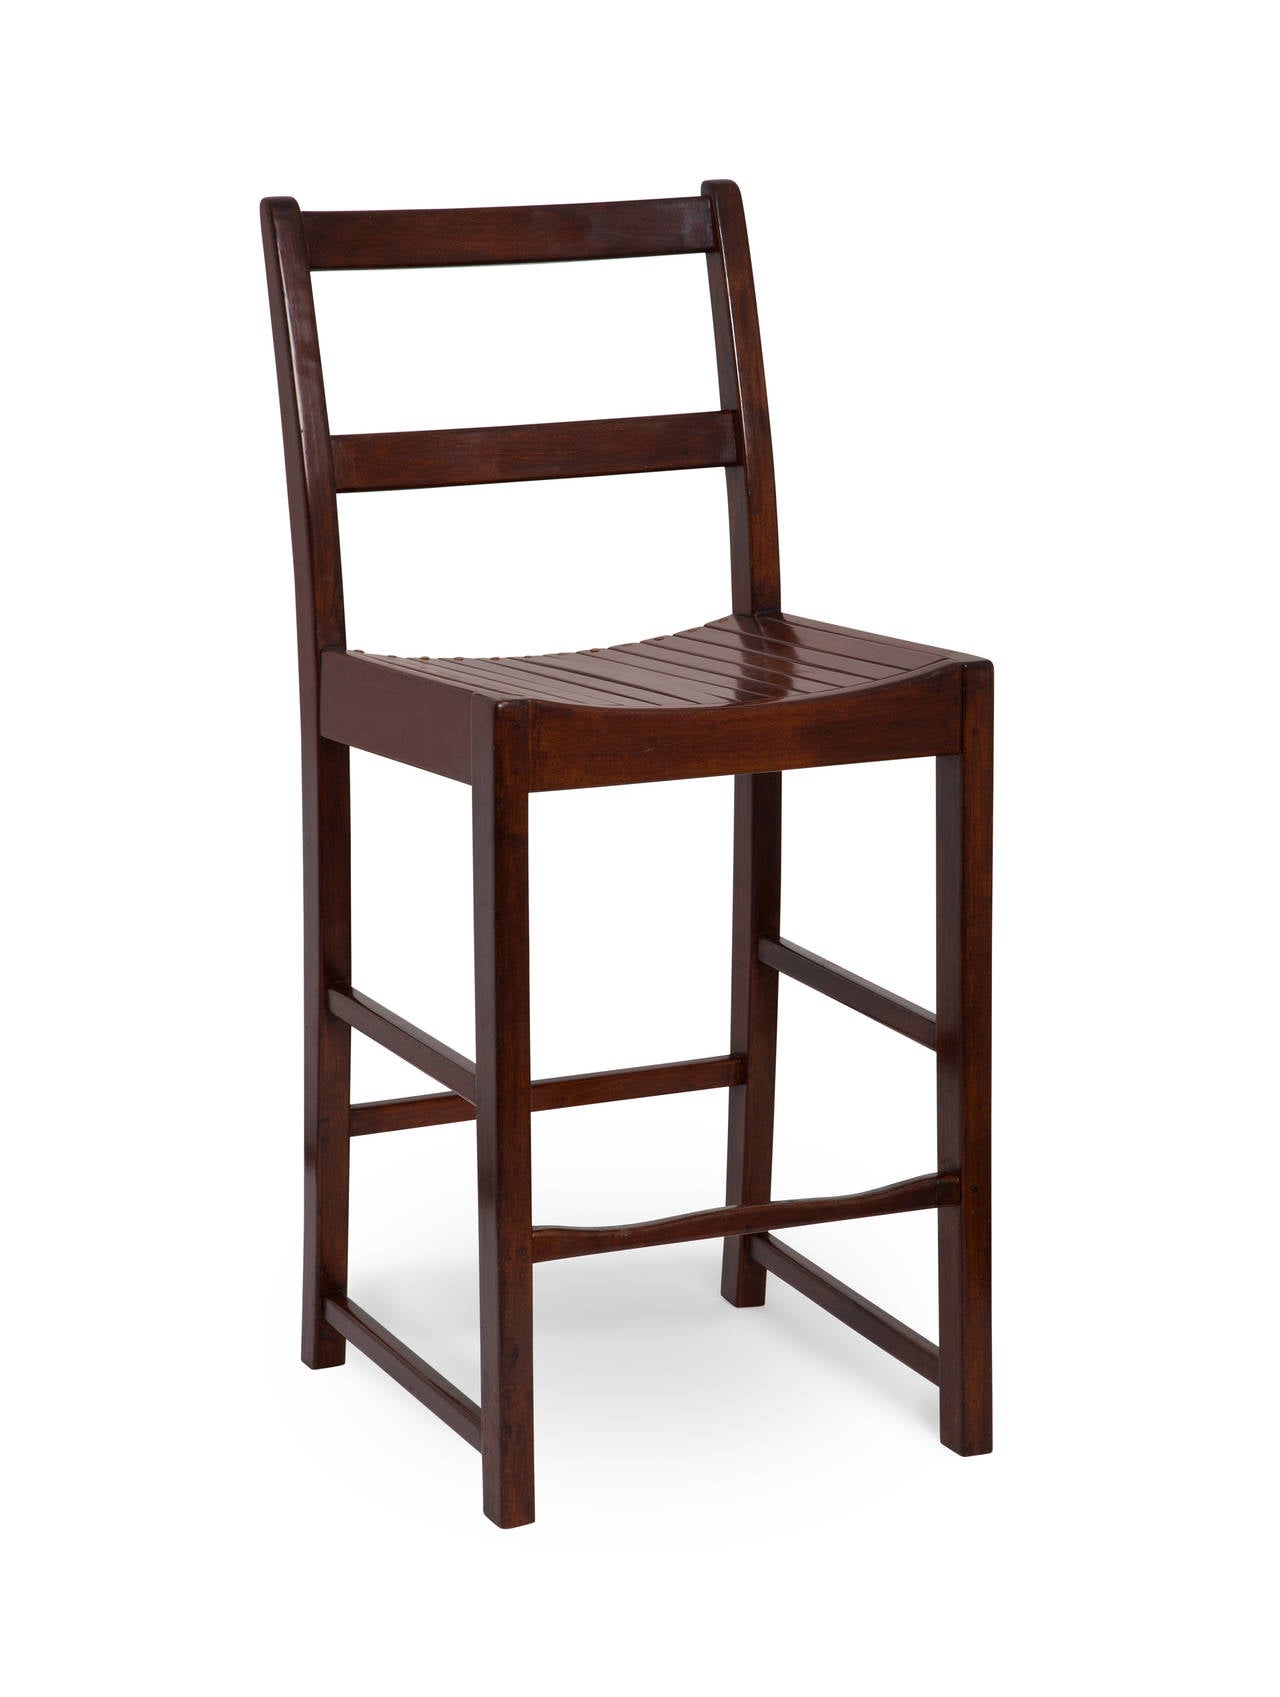 Tapered seat. 
Polished mahogany finish. 
Handmade.

Stools are finished with polished mahogany or can be painted in any color.

Available dimensions:
Seat height: Custom.
Seat width: 16½